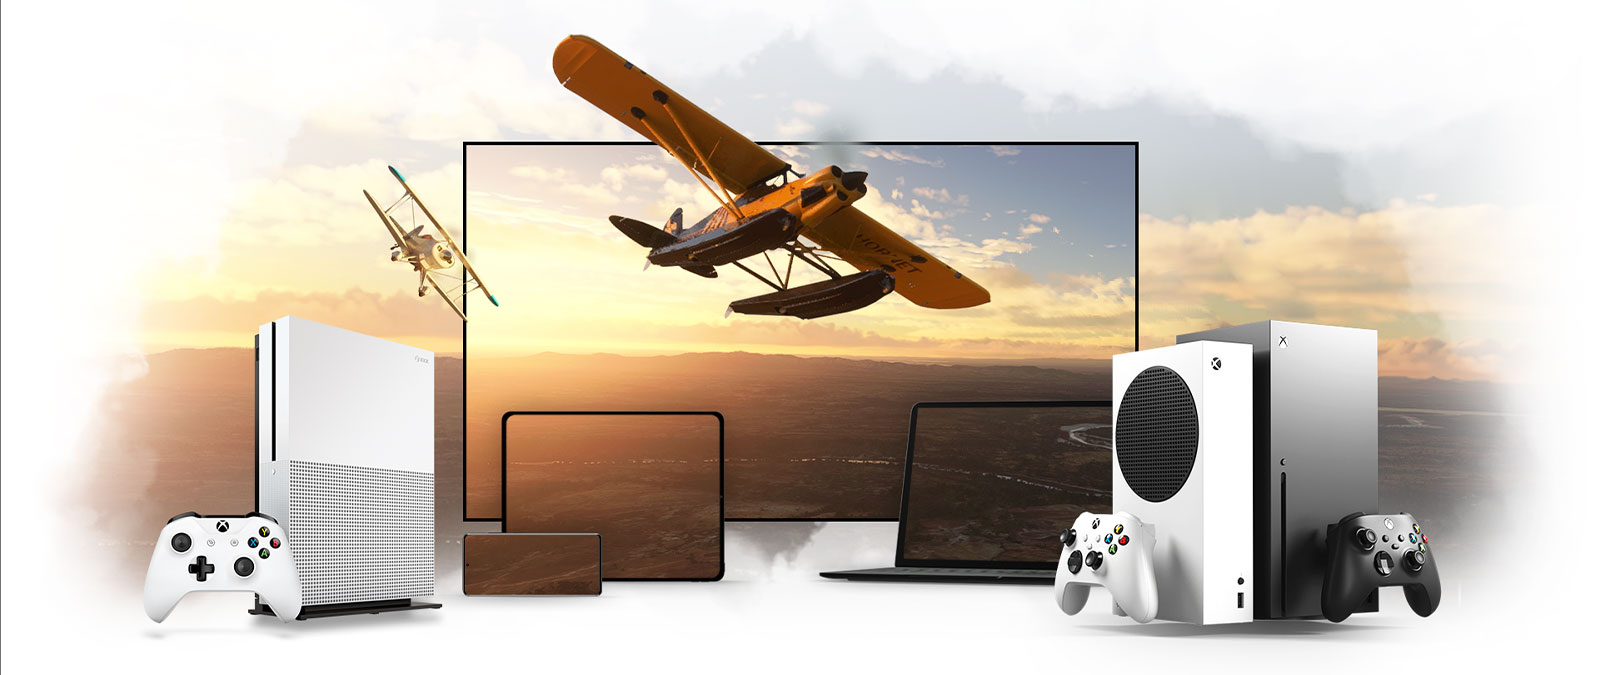 A line-up of devices including a TV, an Xbox One and an Xbox Series X, A propeller plane flies away from a sunlit horizon.